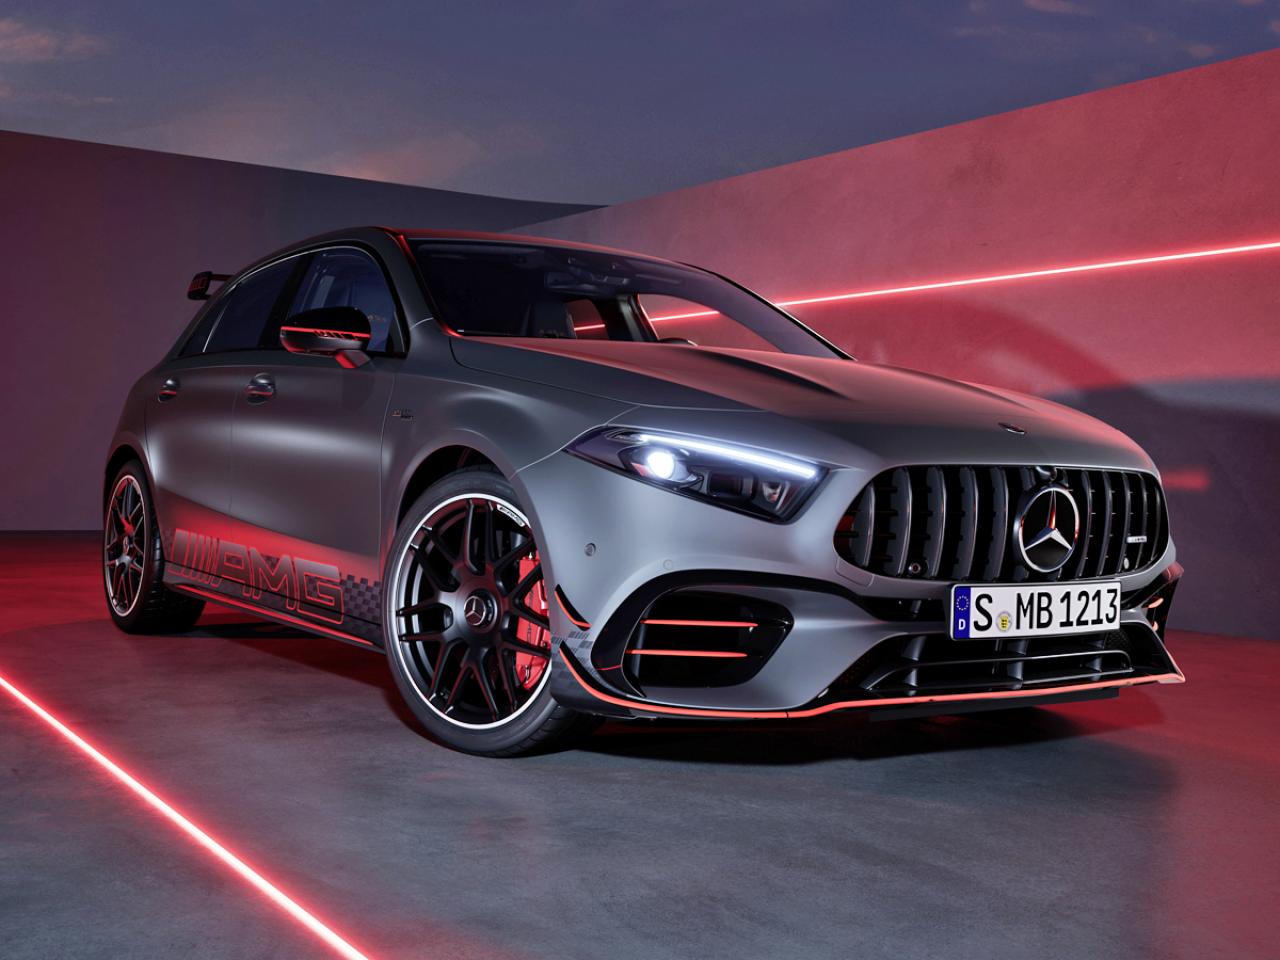 Mercedes-AMG A45 S hot-hatch launched at Rs 92.50 lakh | Team-BHP